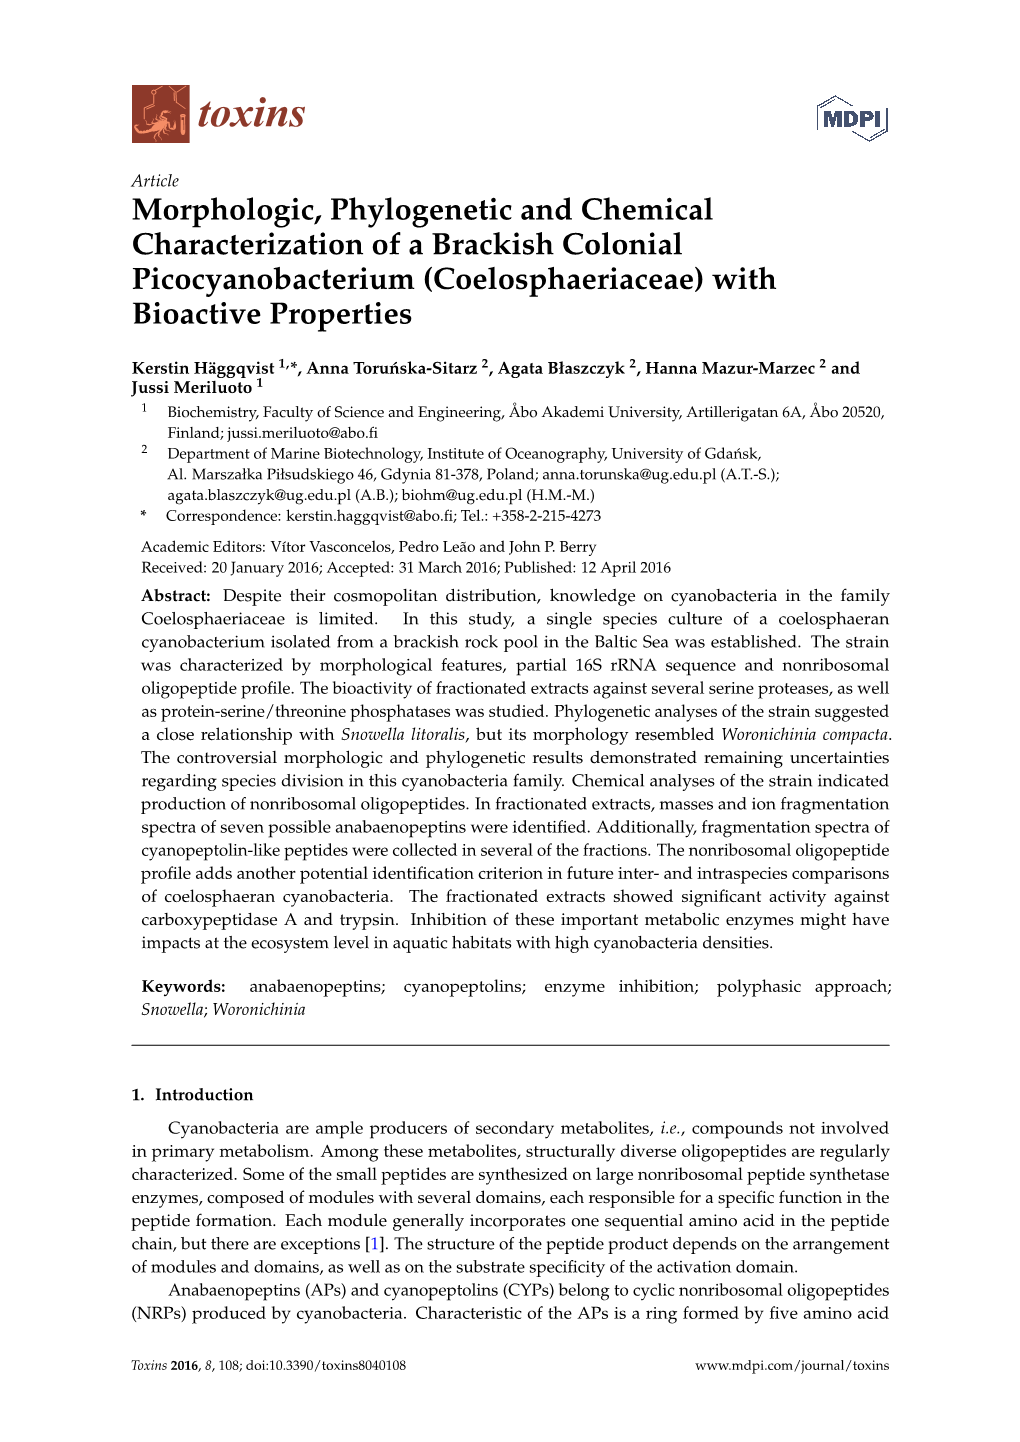 Morphologic, Phylogenetic and Chemical Characterization of a Brackish Colonial Picocyanobacterium (Coelosphaeriaceae) with Bioactive Properties